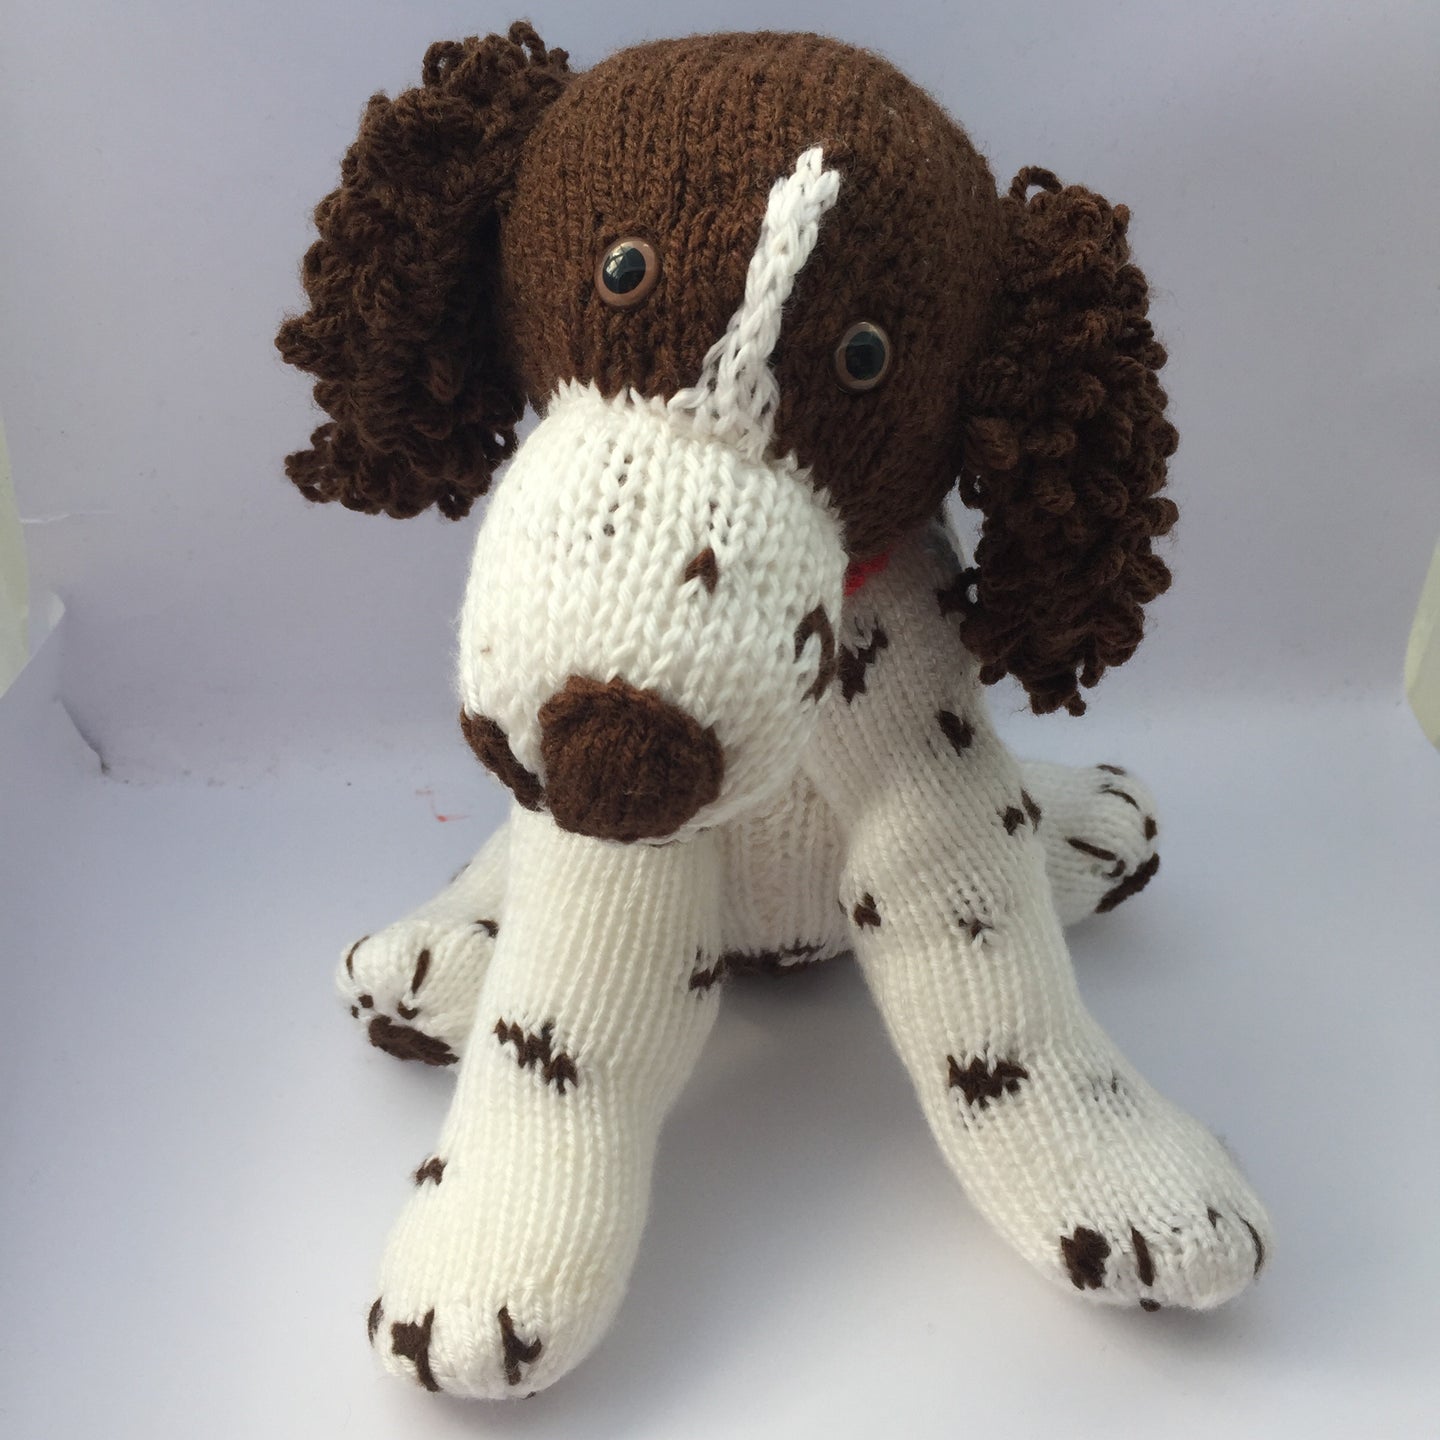 Susie the Knitted Spaniel